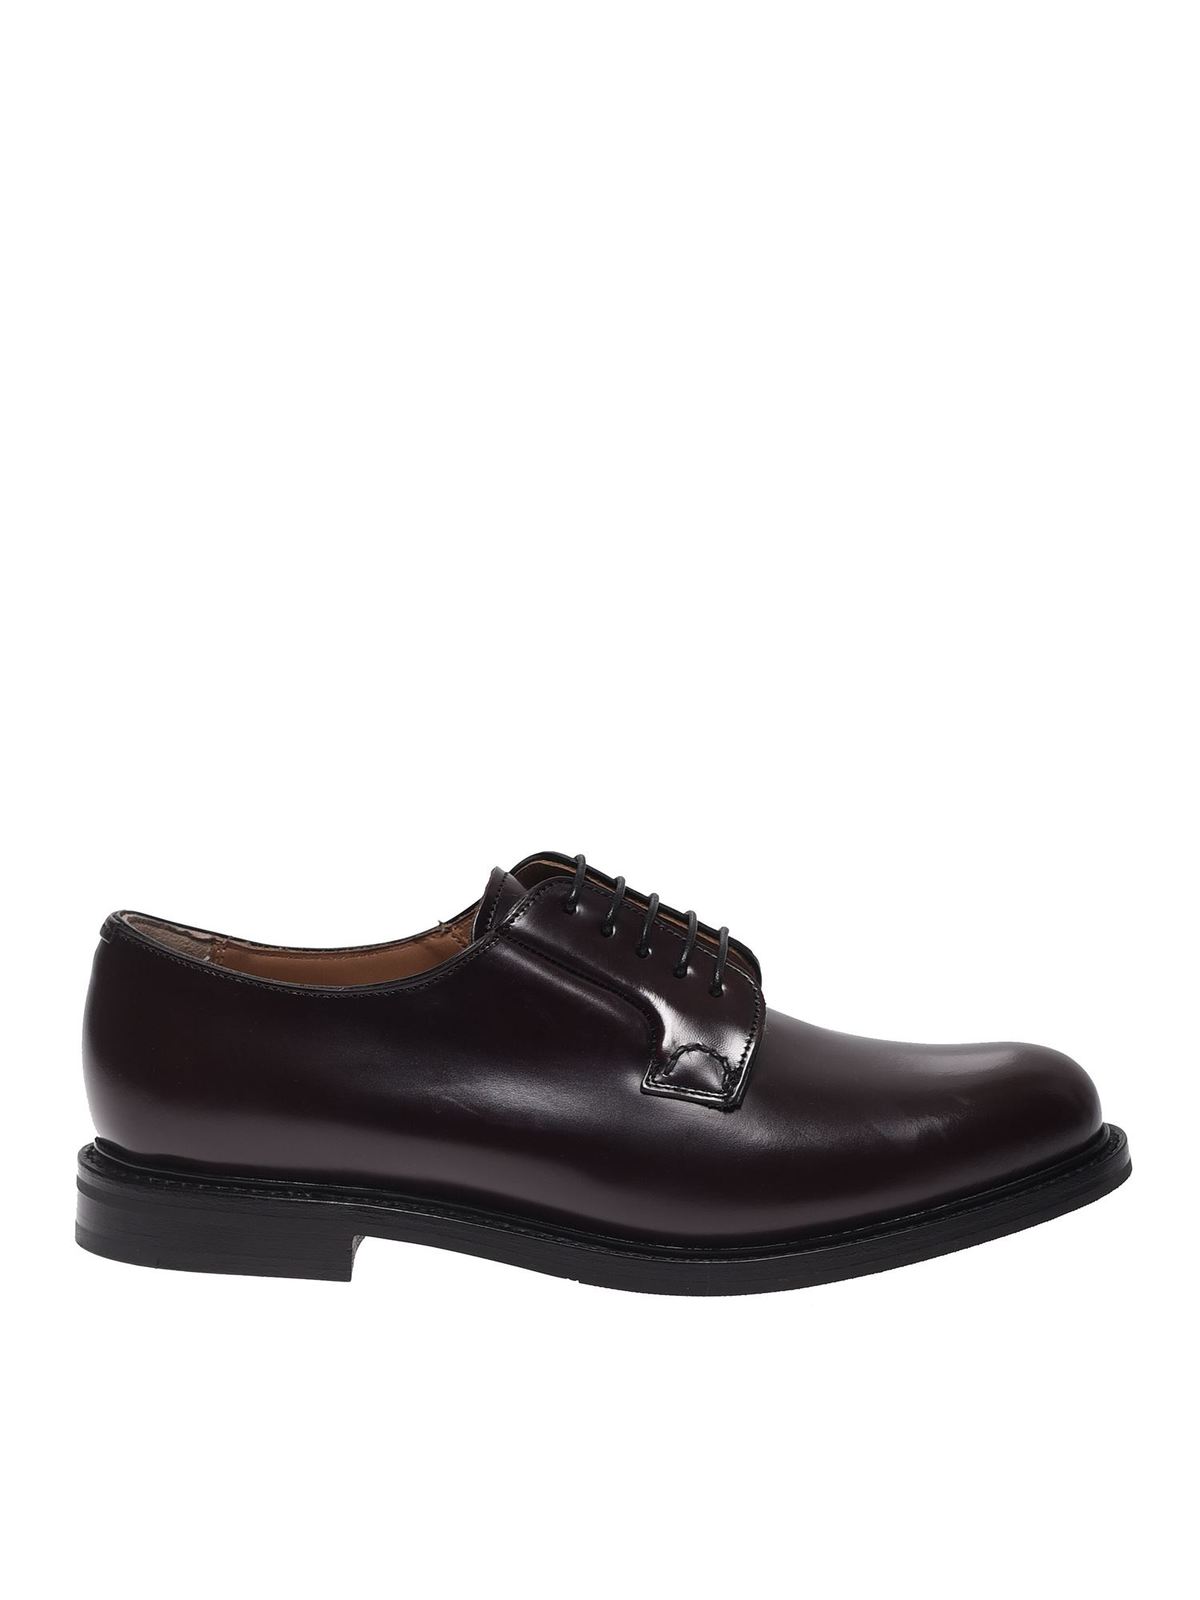 Church's Shannon Burgundy Discount, SAVE 37% - cocoguate.com